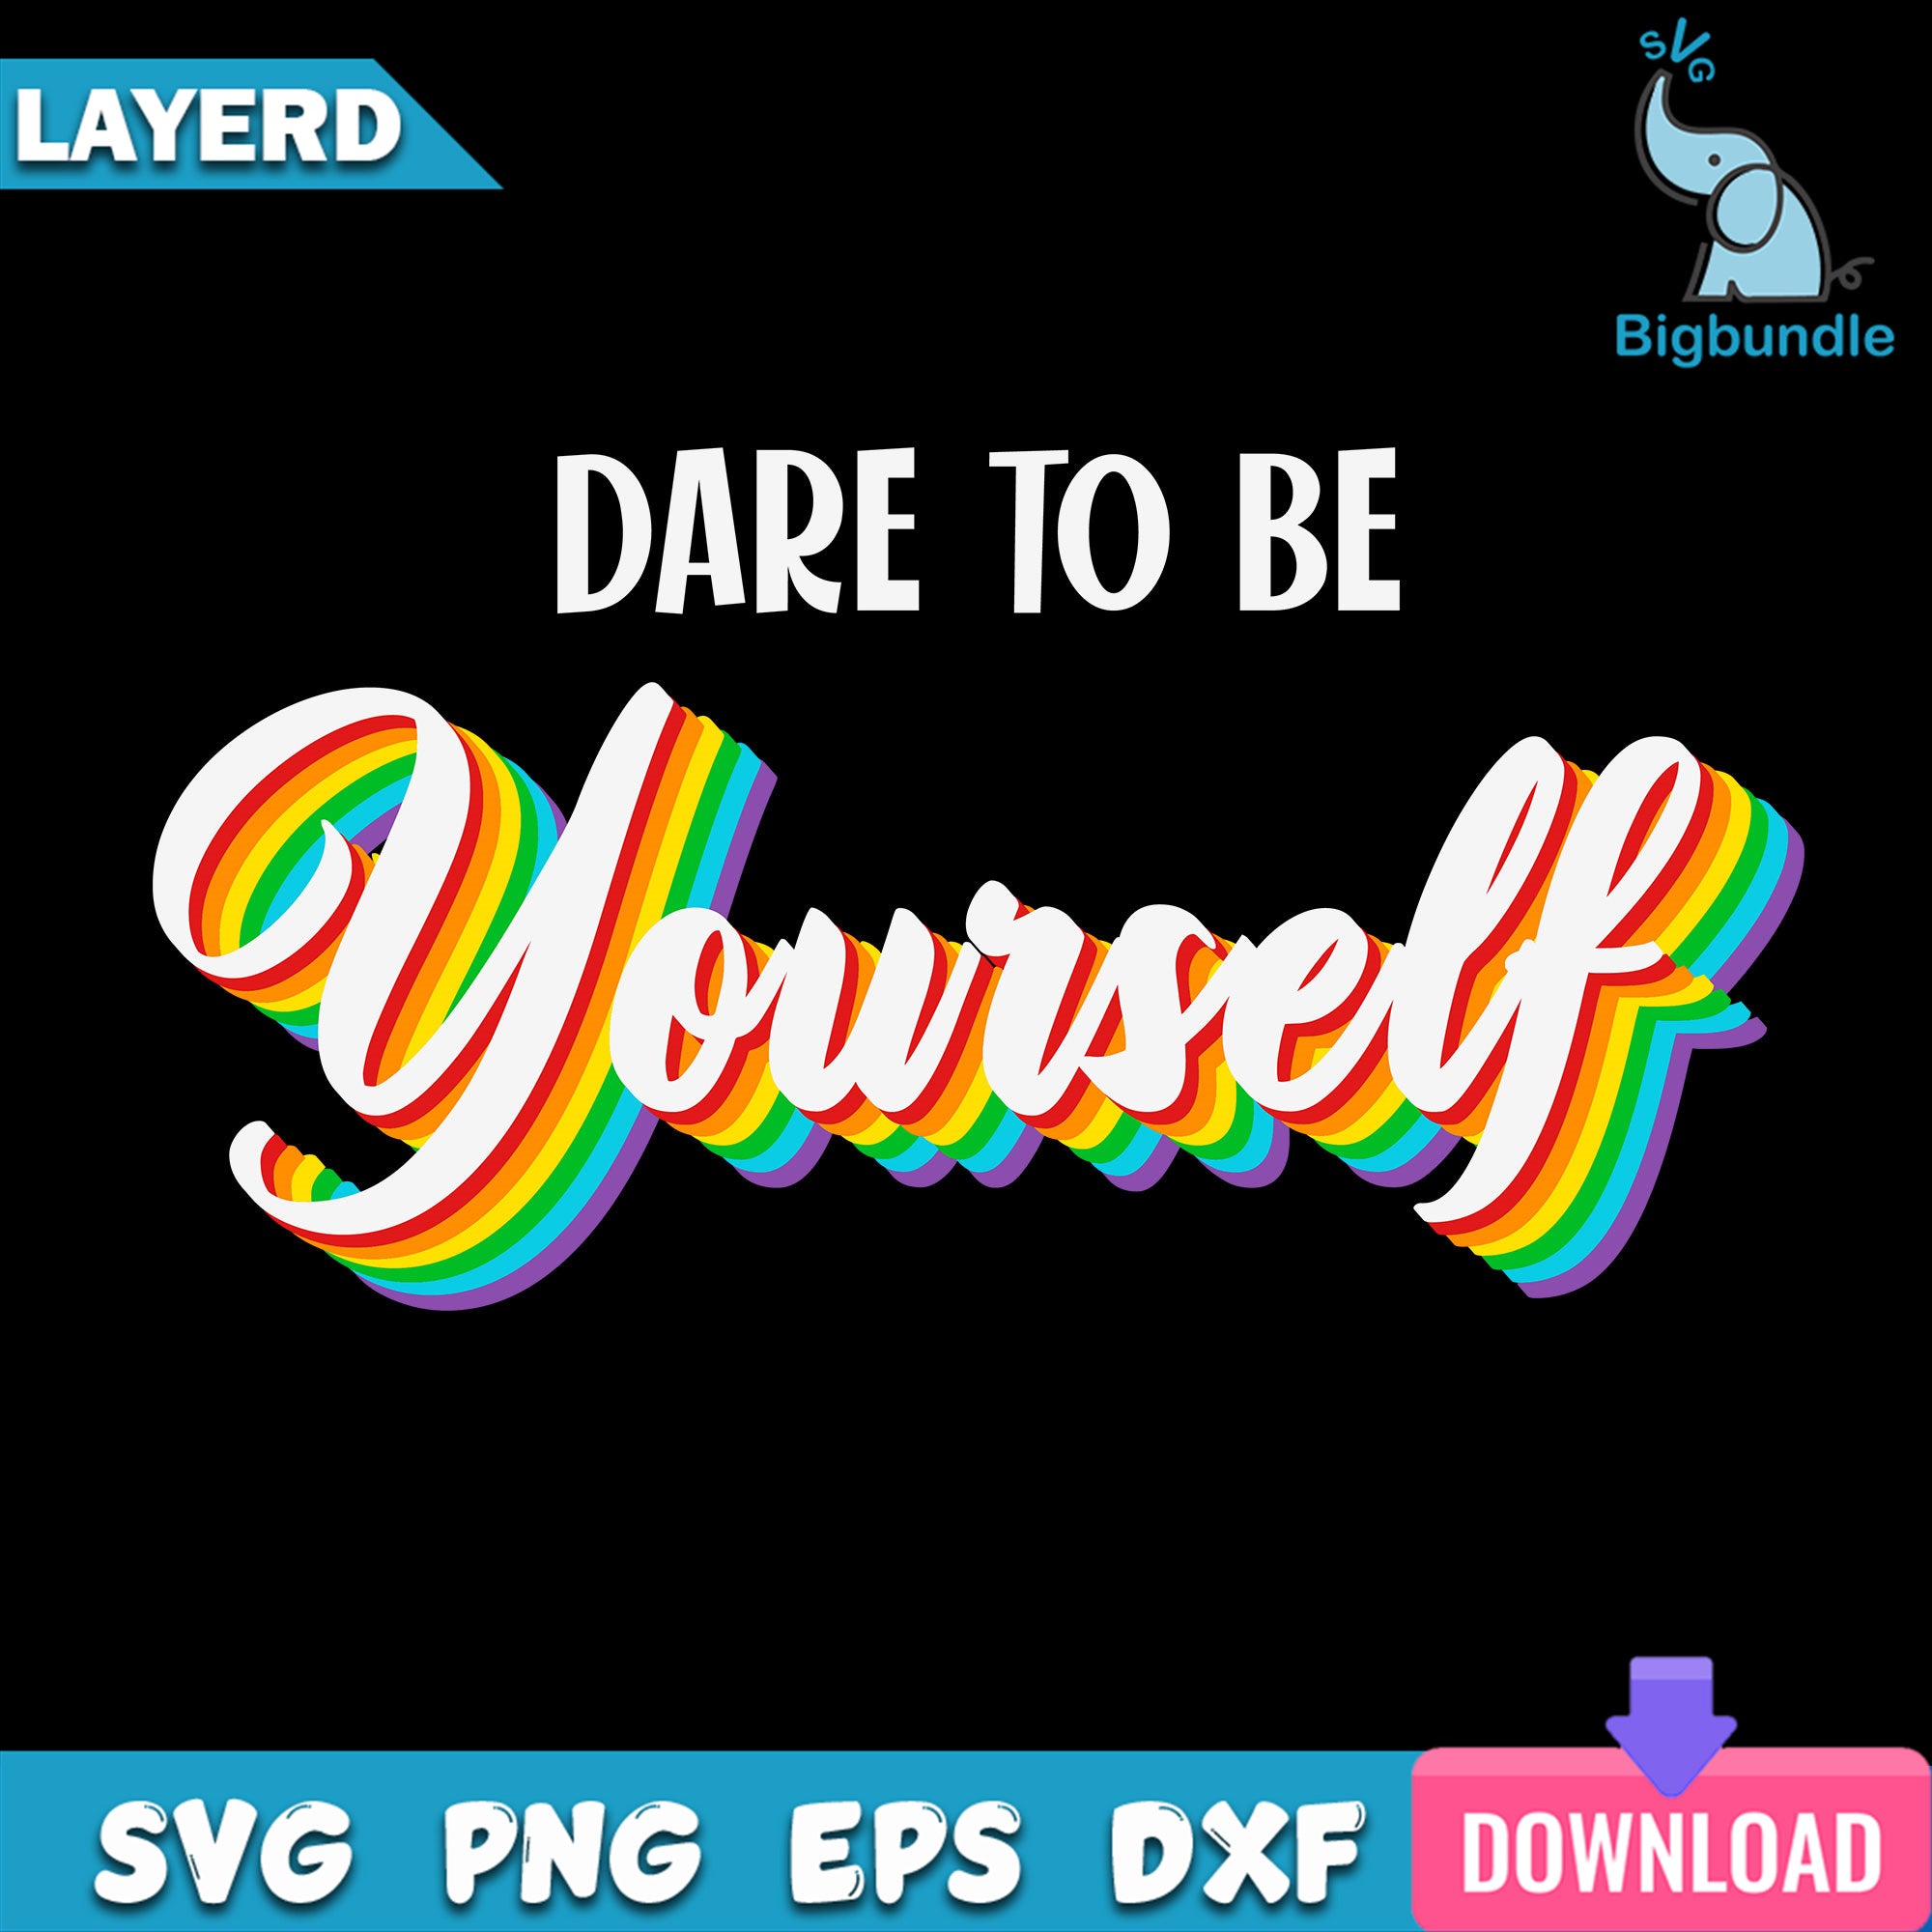 Dare To Be Yourself Svg, LGBT Svg, Quote Svg